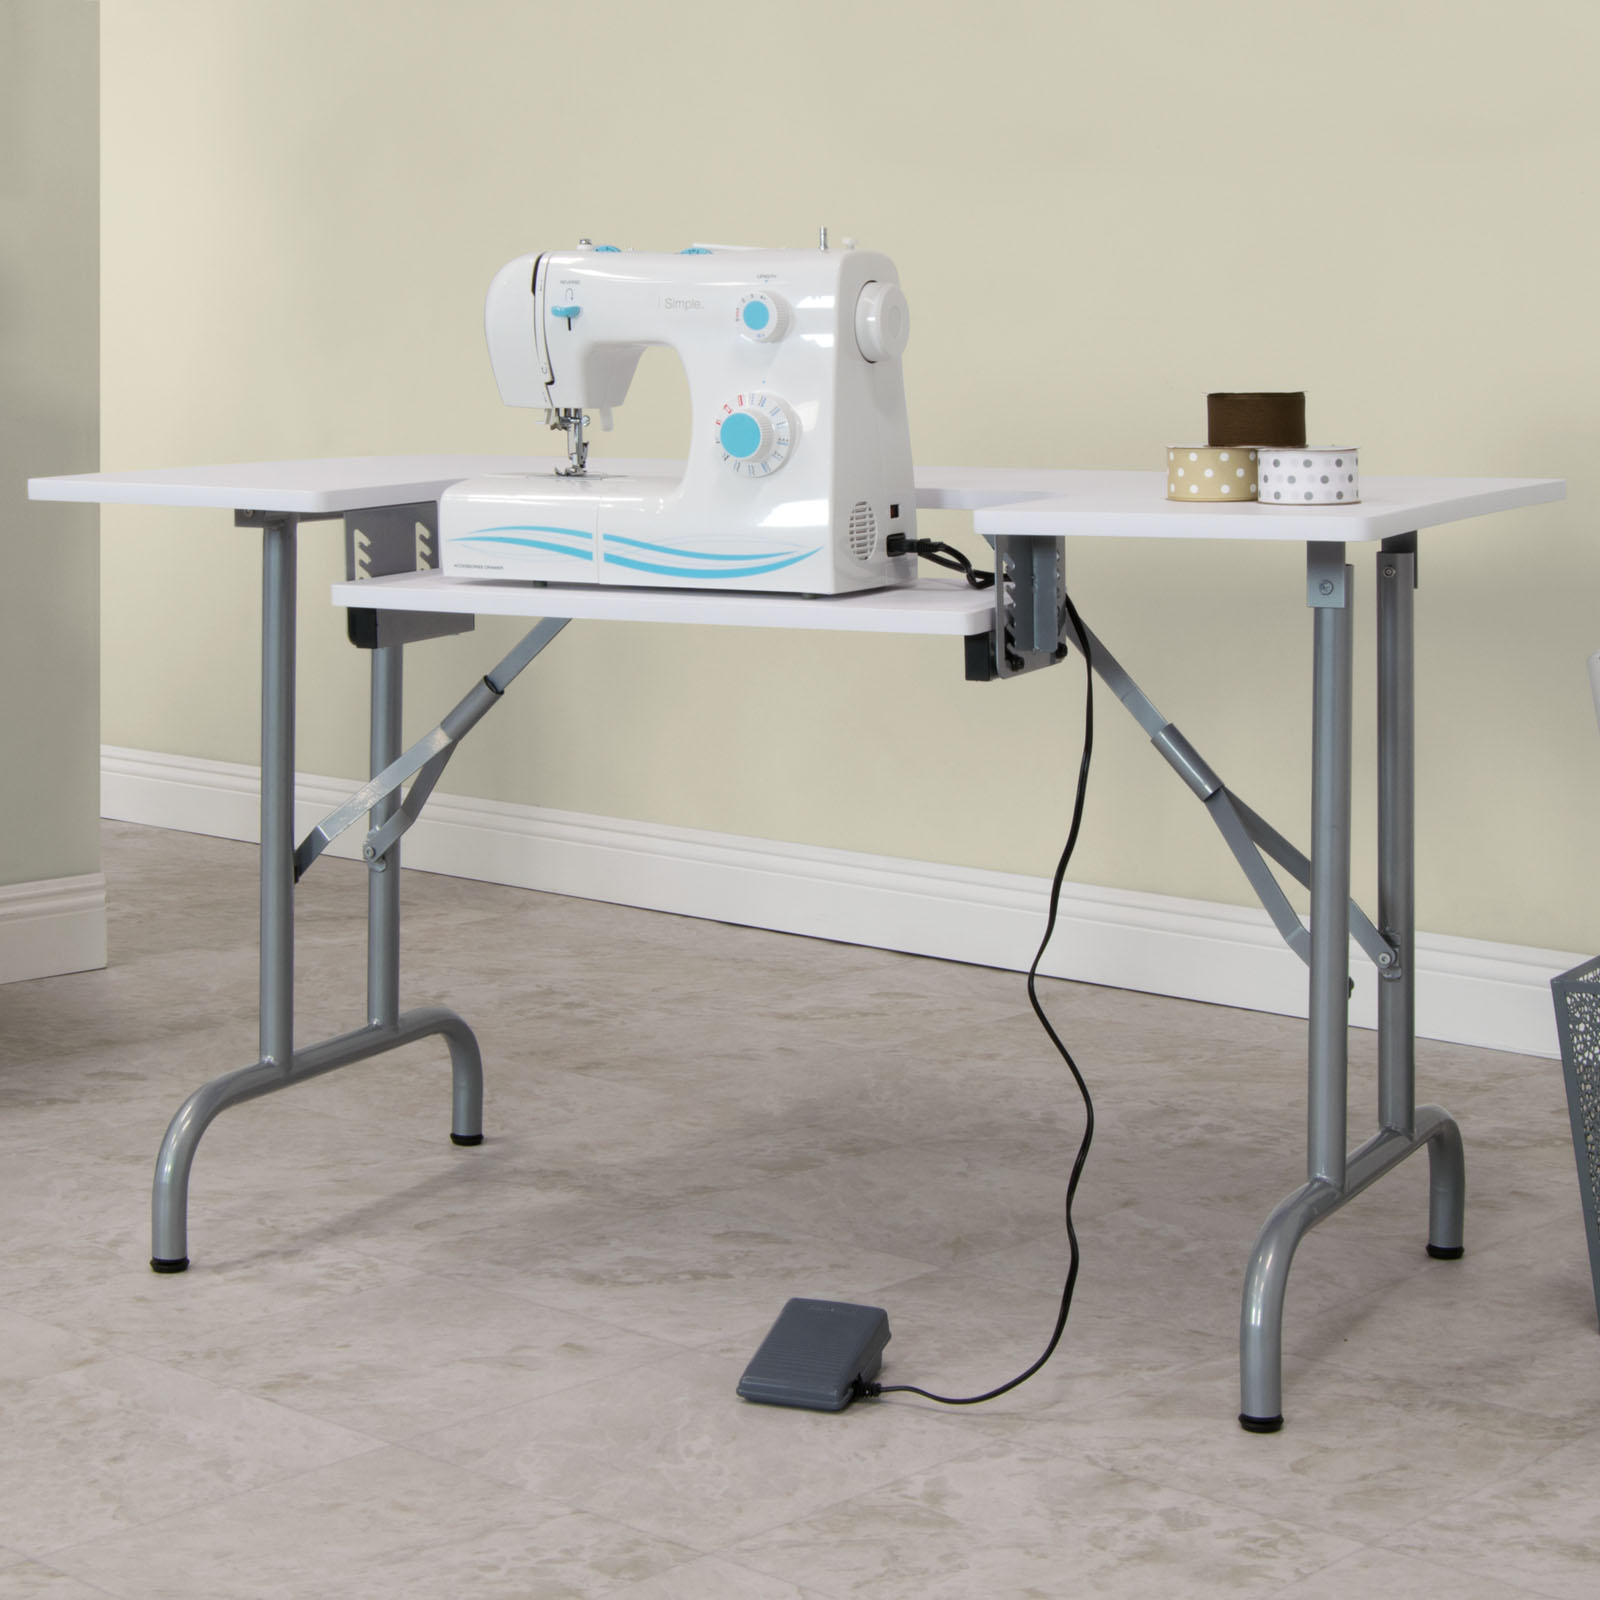 Folding Multipurpose Sewing Table in Silver / White - Item ...